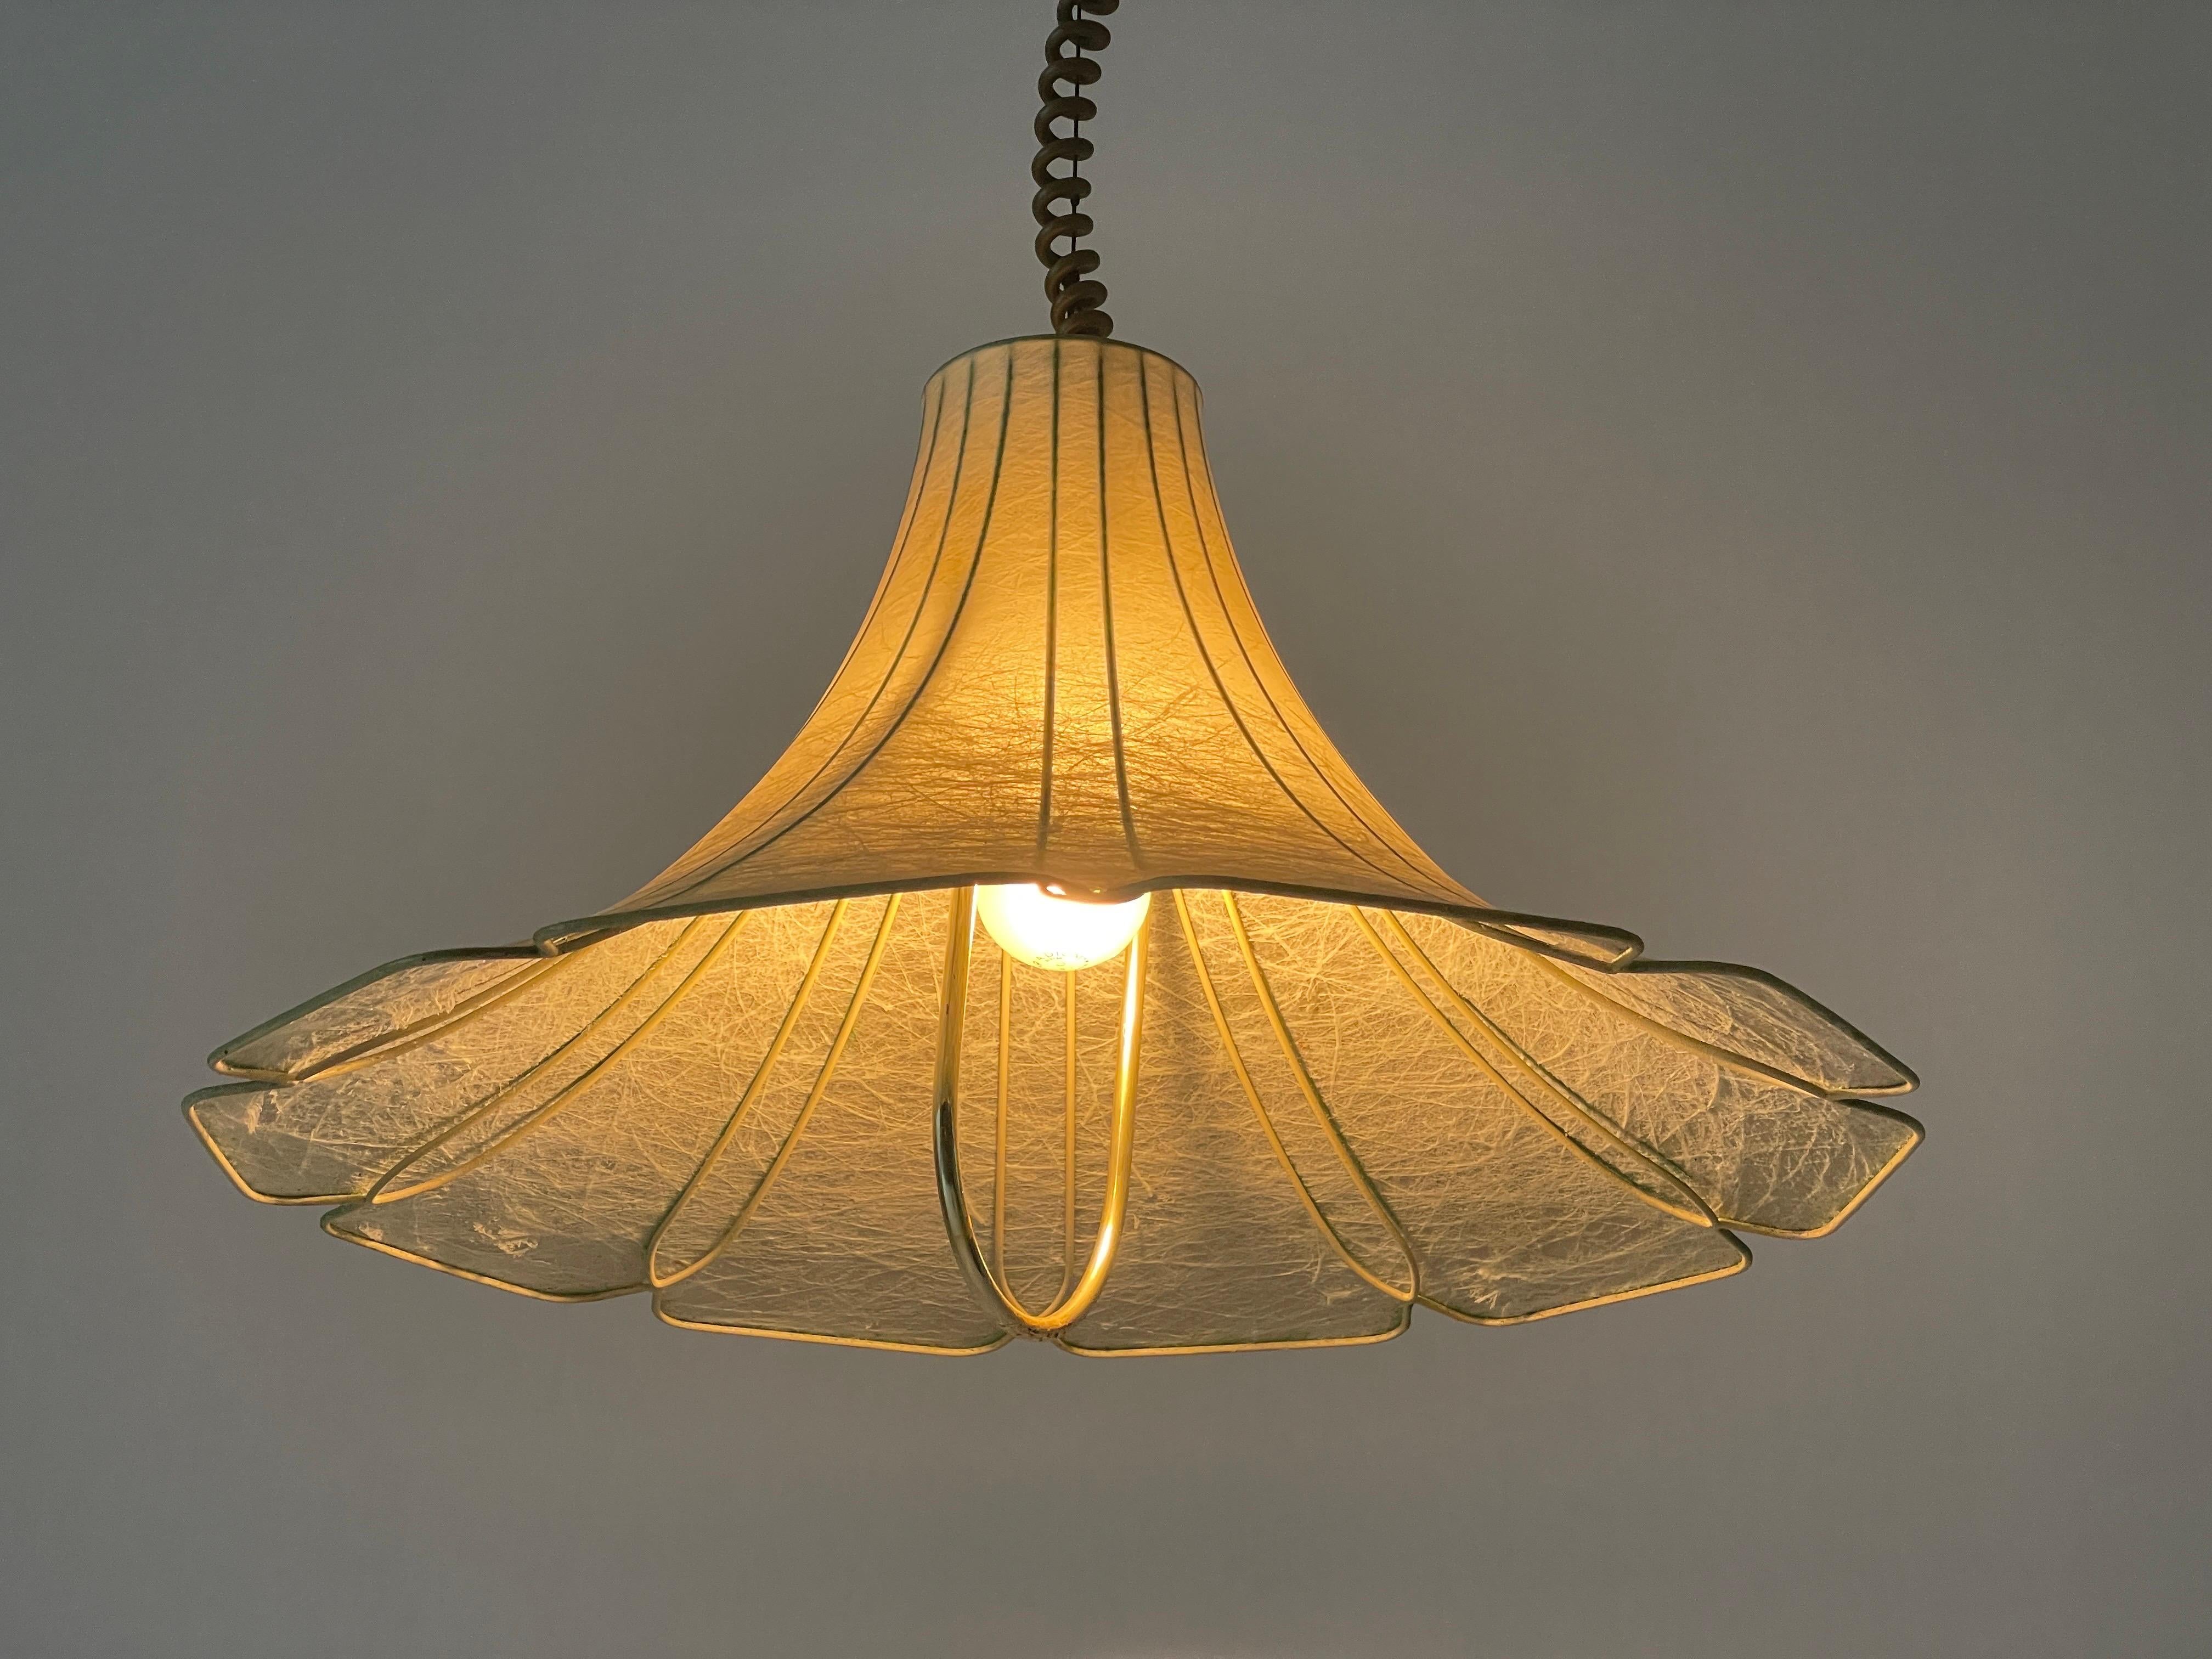 Tulip Design Cocoon Adjustable Height Pendant Lamp by Goldkant, 1960s, Germany For Sale 3